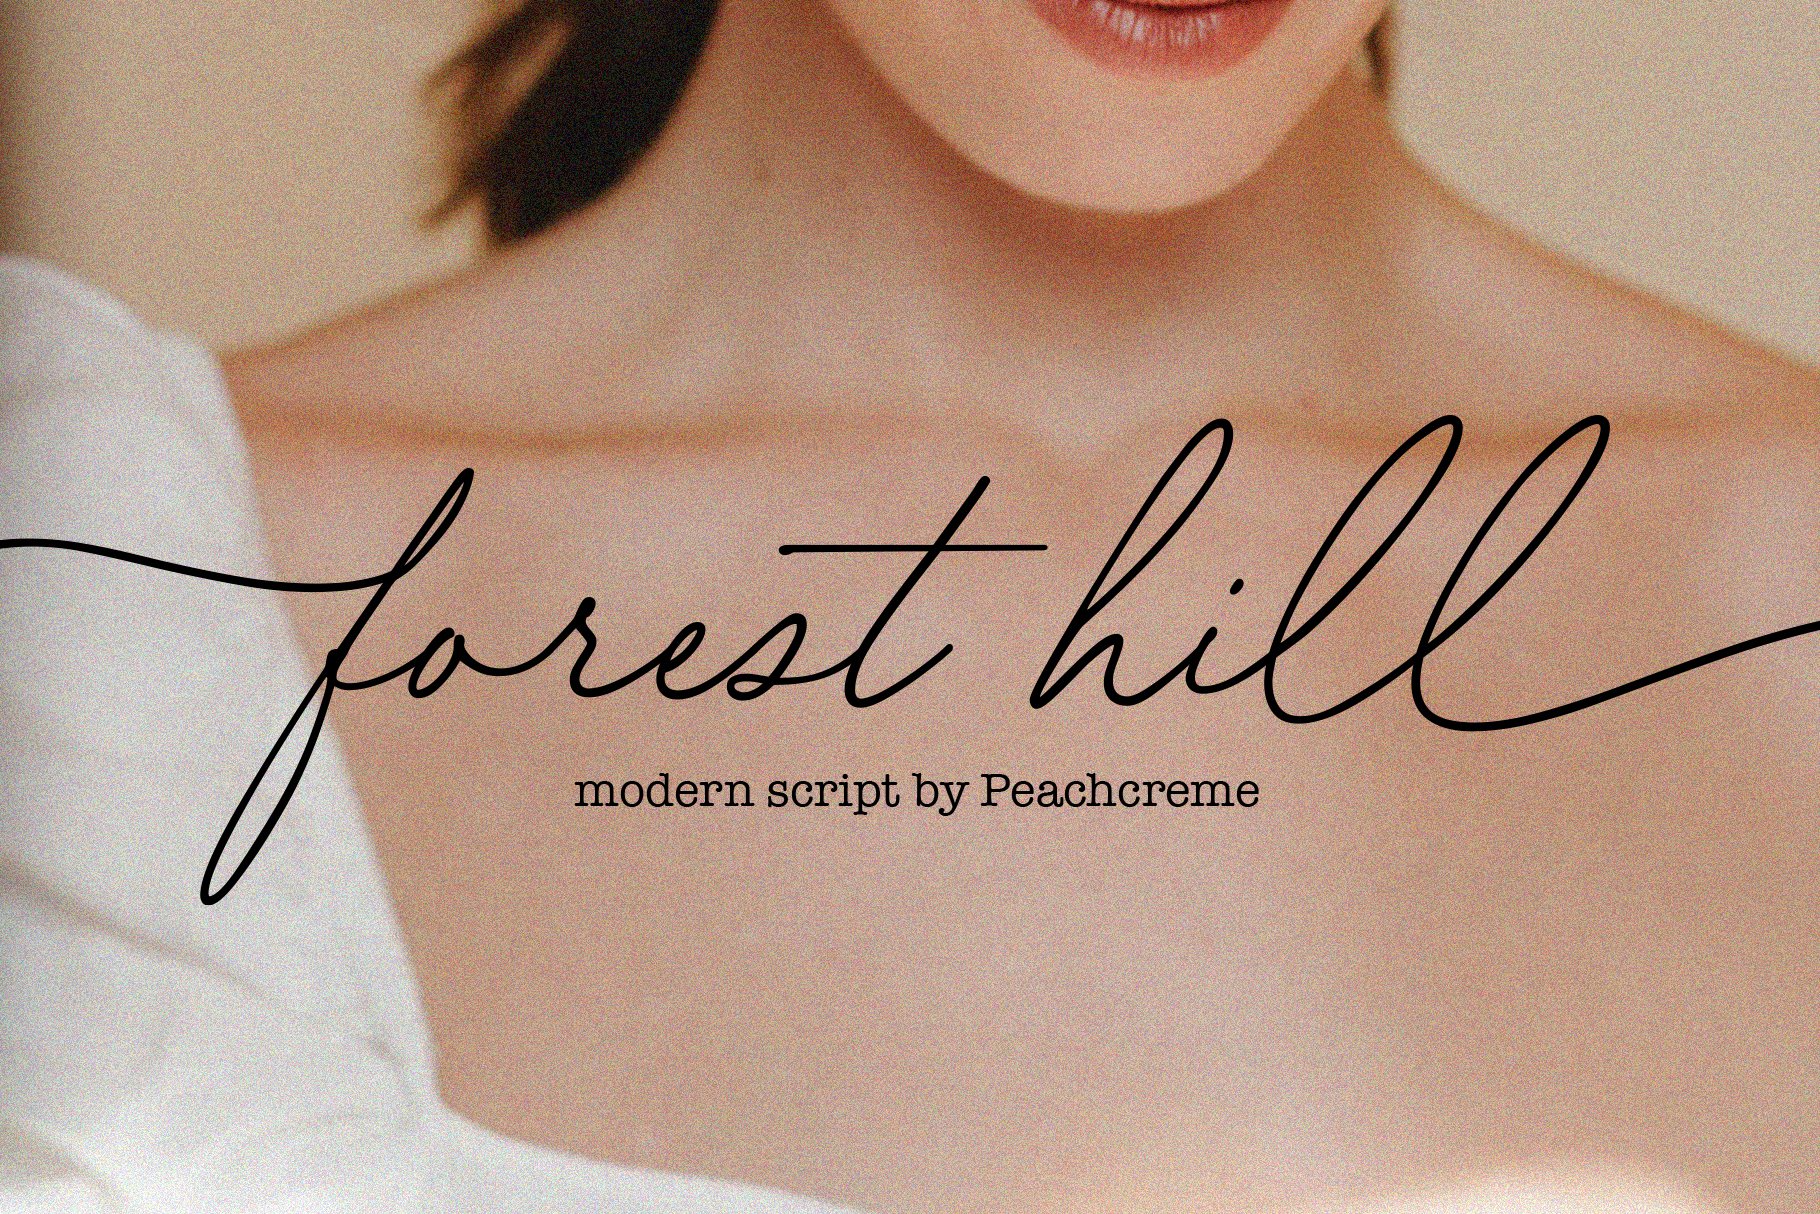 The Forest Hill font has beautiful swashes to help create a clean handwriting style with a natural flow.